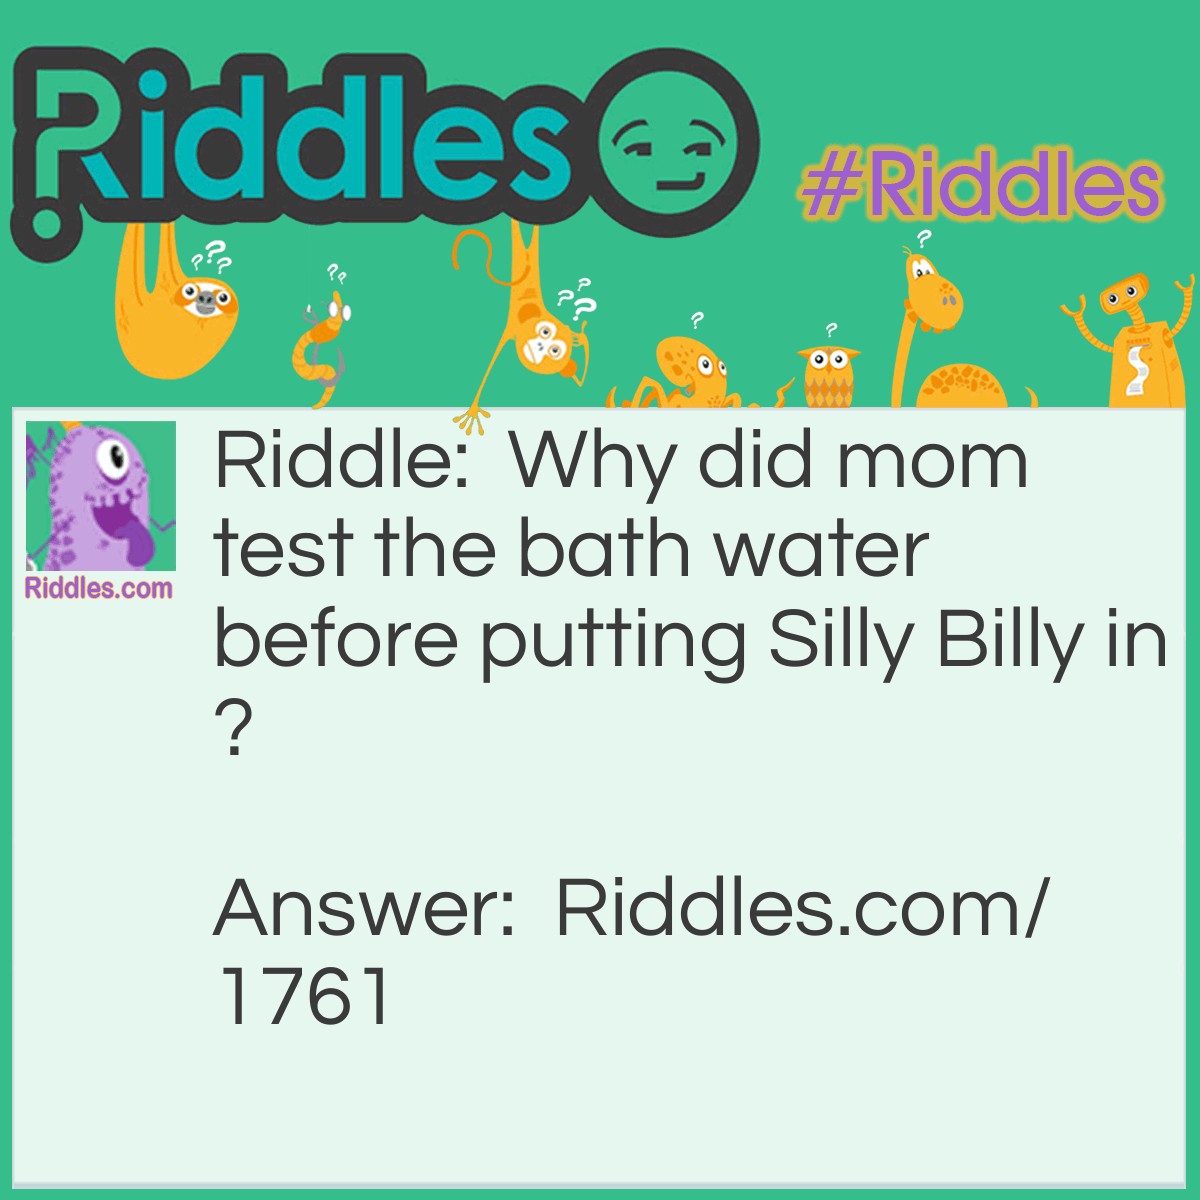 Riddle: Why did mom test the bath water before putting <a href="https://www.riddles.com/funny-riddles">Silly</a> Billy in? Answer: To prevent son-burn.